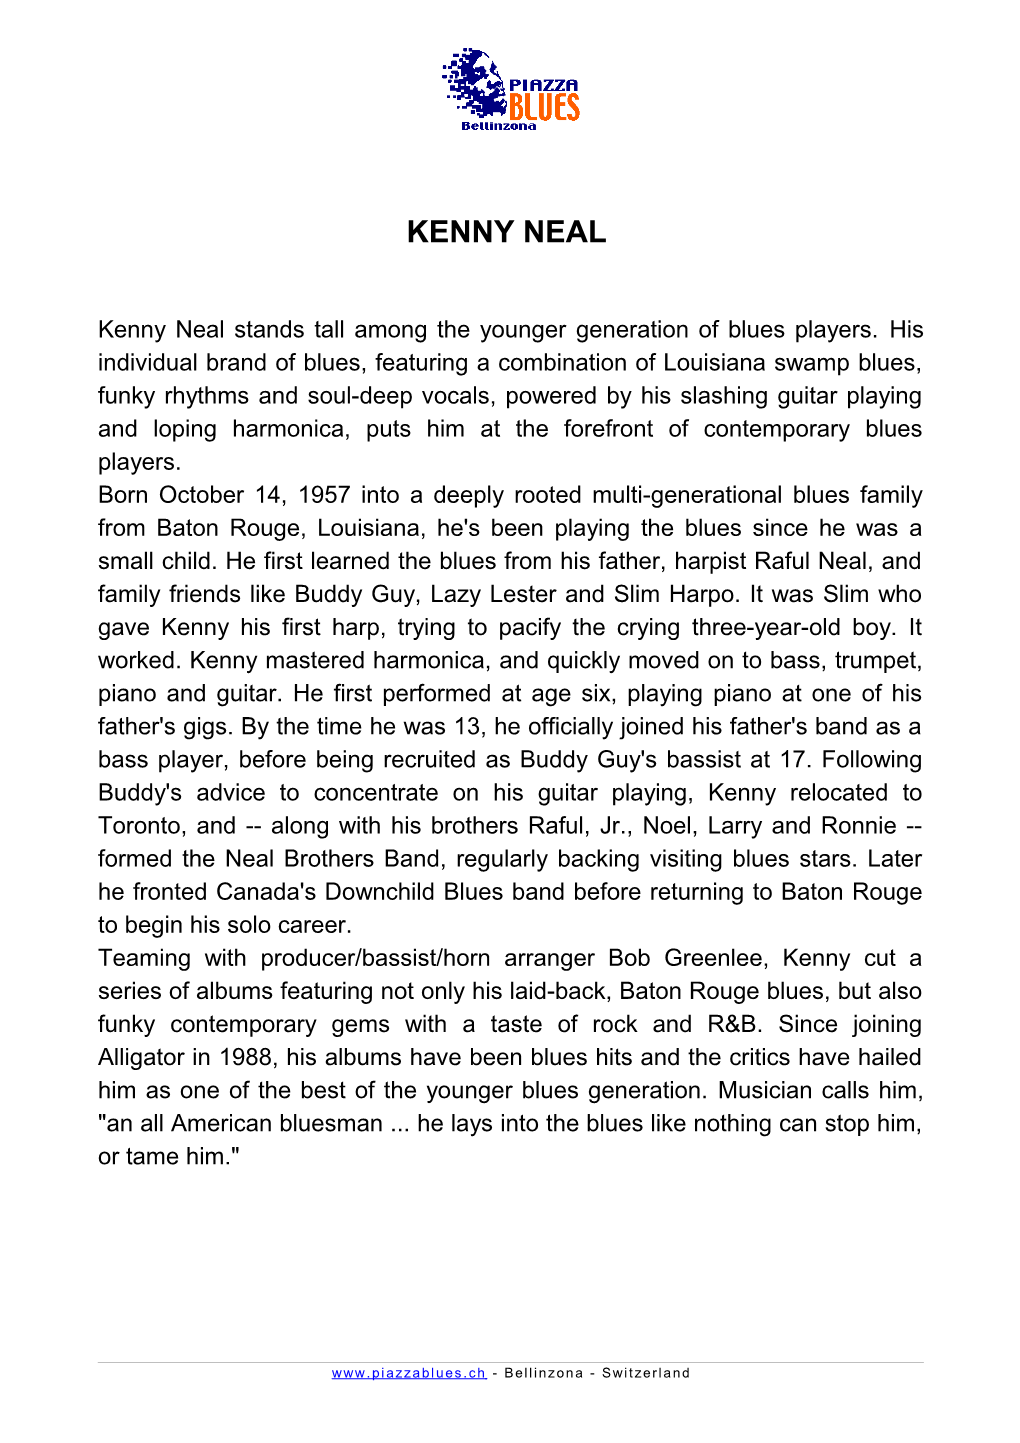 Kenny Neal Stands Tall Among the Younger Generation of Blues Players. His Individual Brand